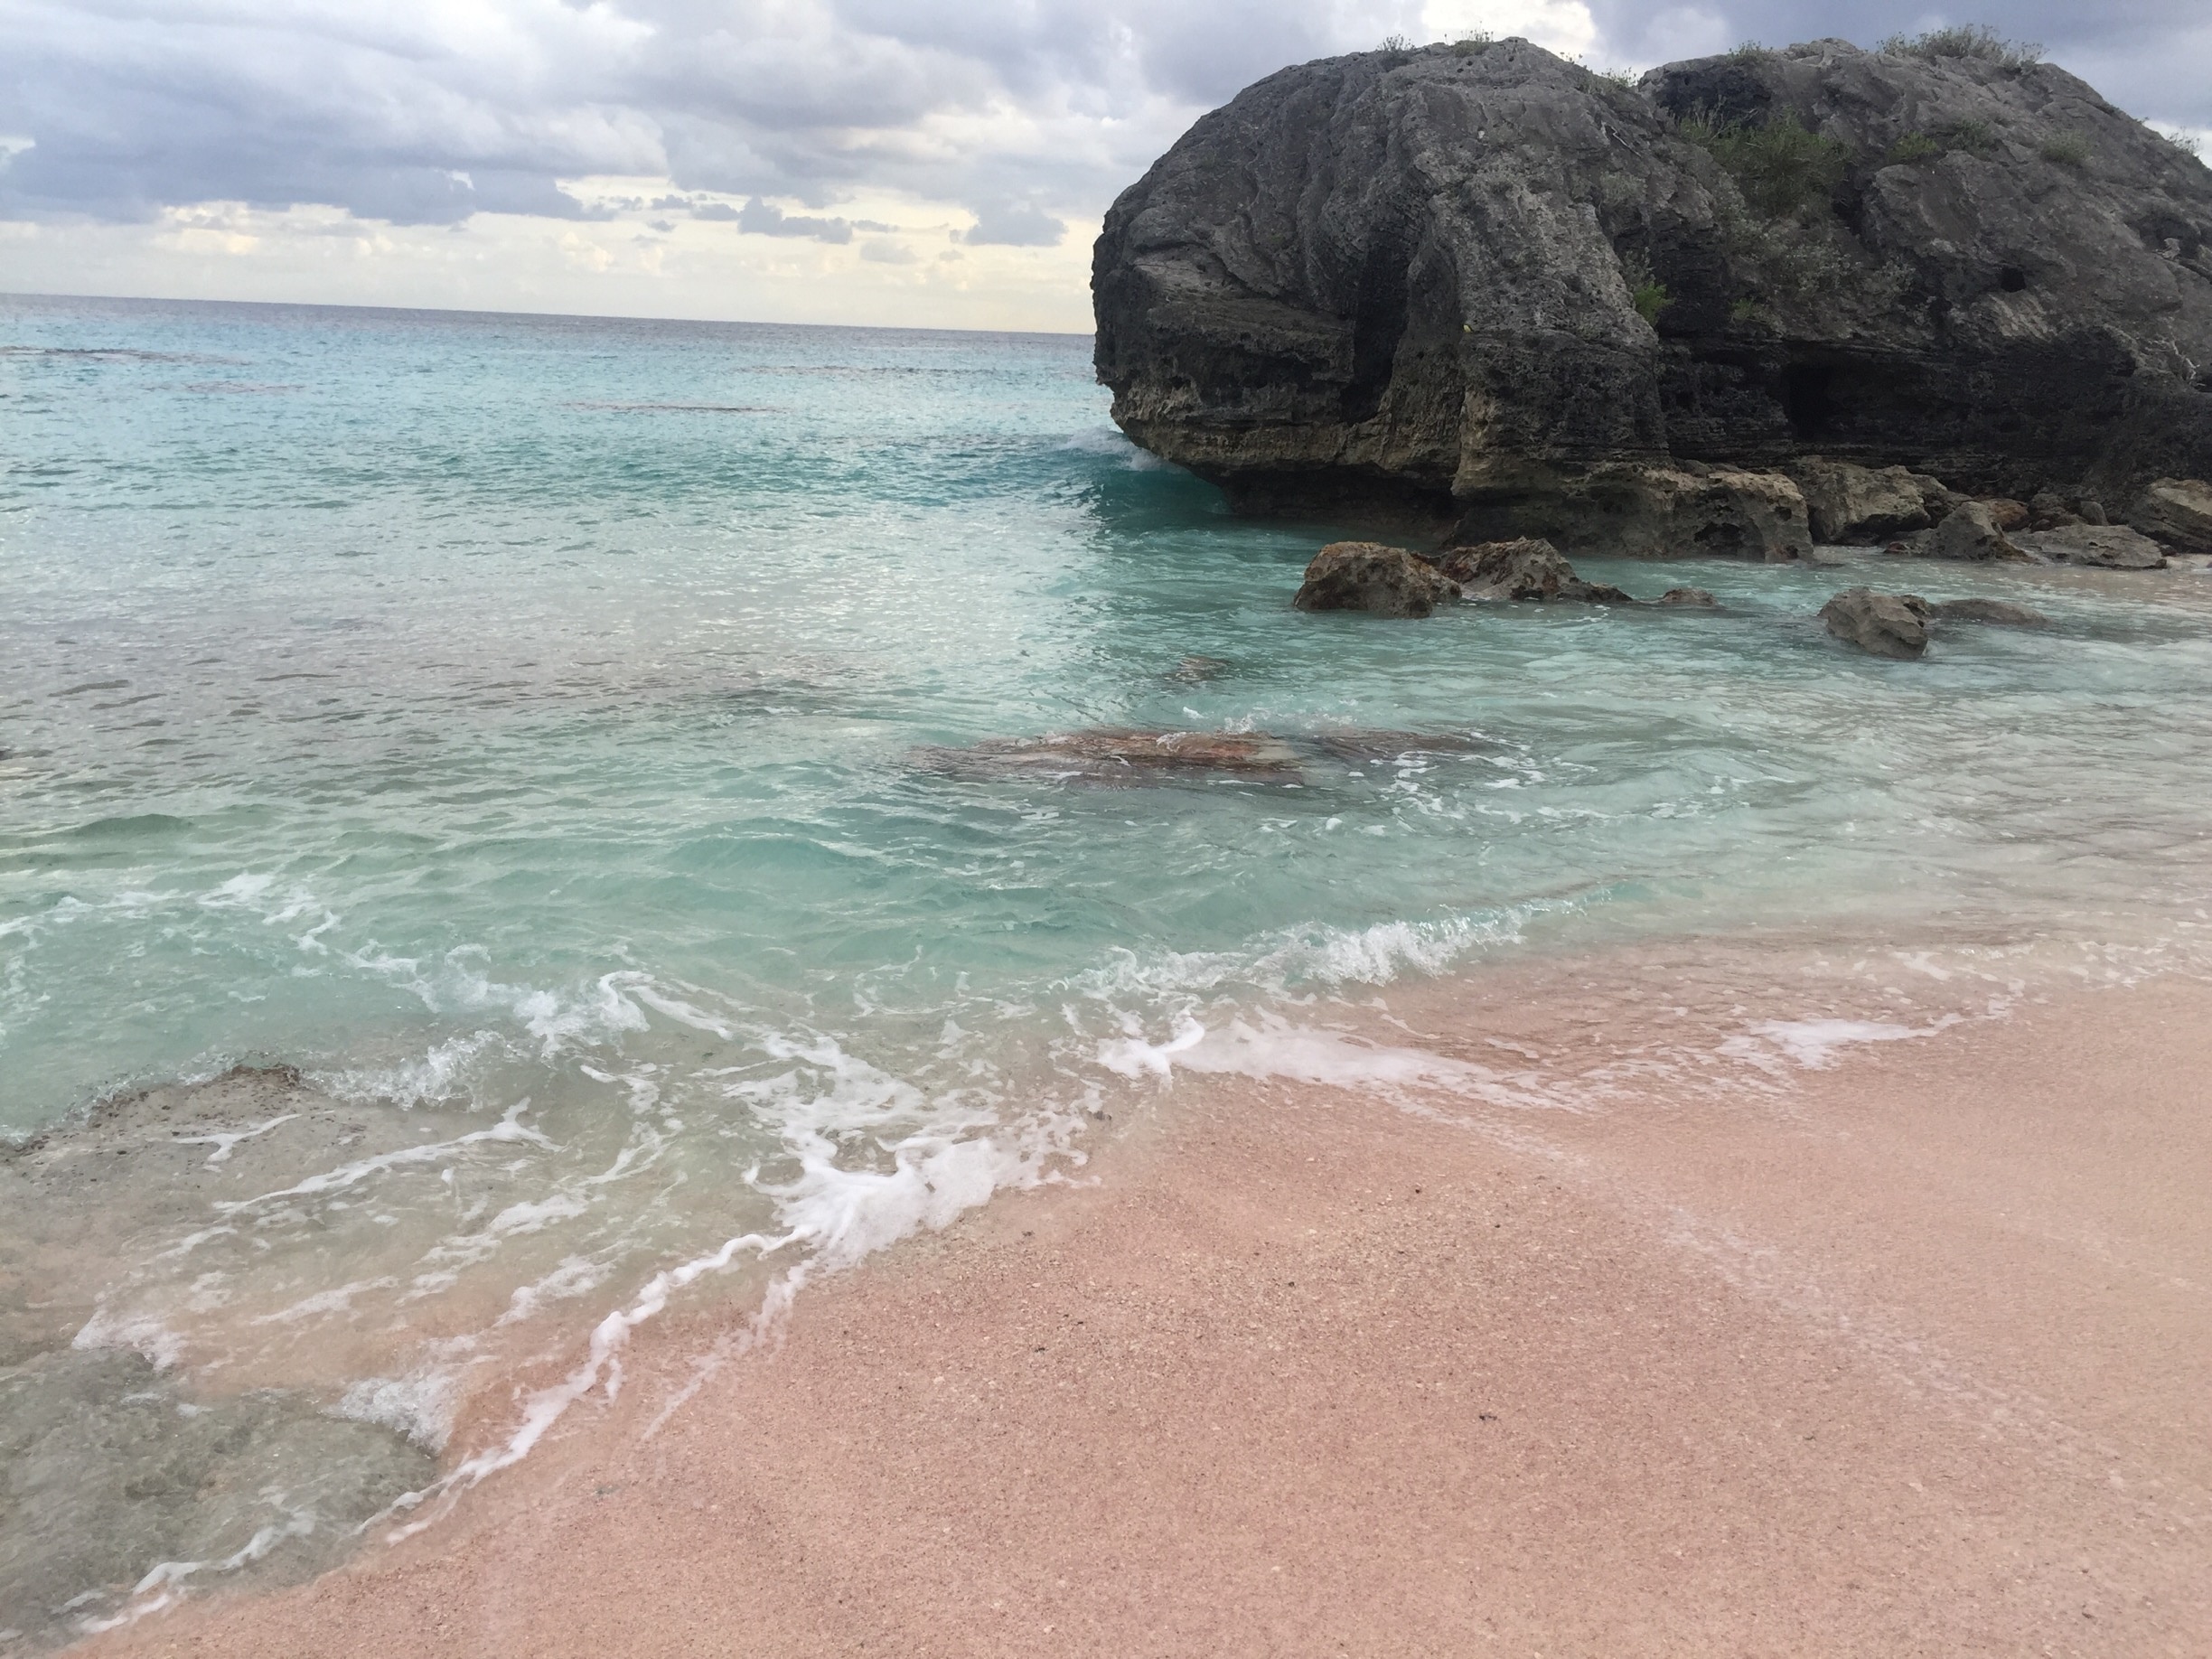 How many colors do you see? Pink sand is not found in very many places. #InStone